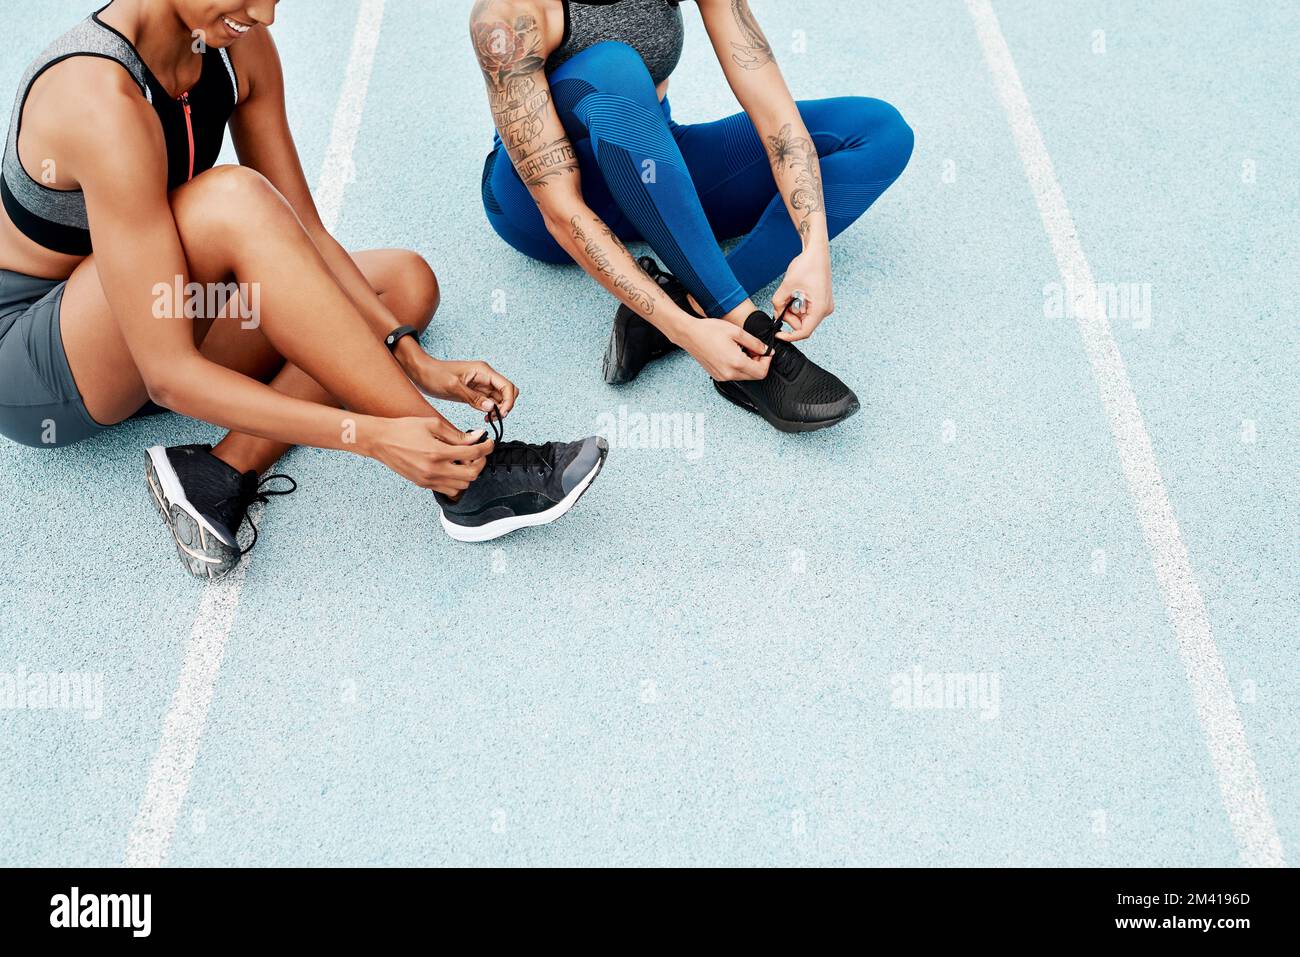 Have to make sure our laces are tied. two attractive young athletes sitting together and tying their shoelaces before running on a track. Stock Photo